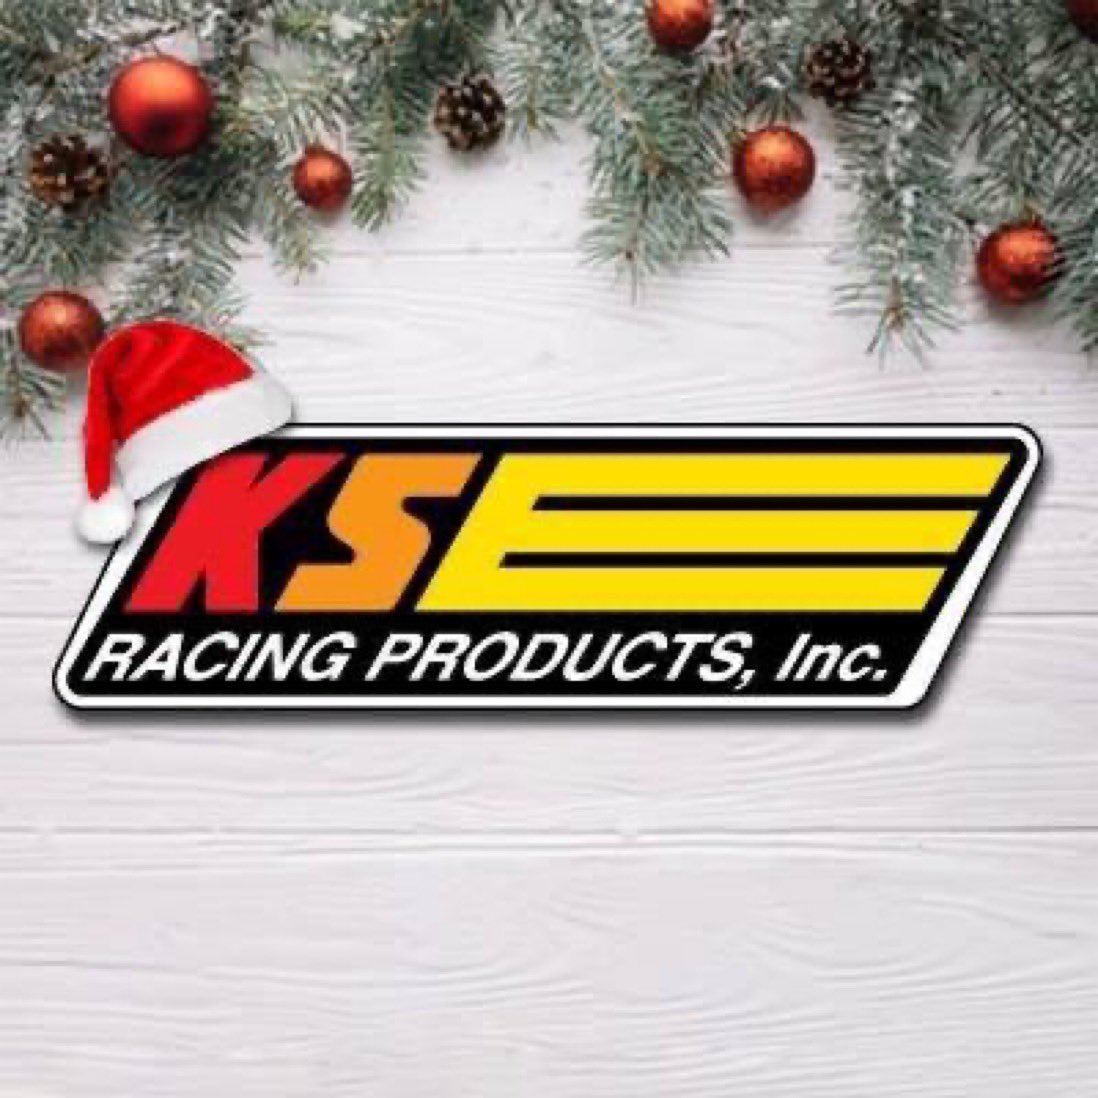 From all of us at KSE Racing, we wish everyone a very Merry Christmas! 🎄🎁 🎅